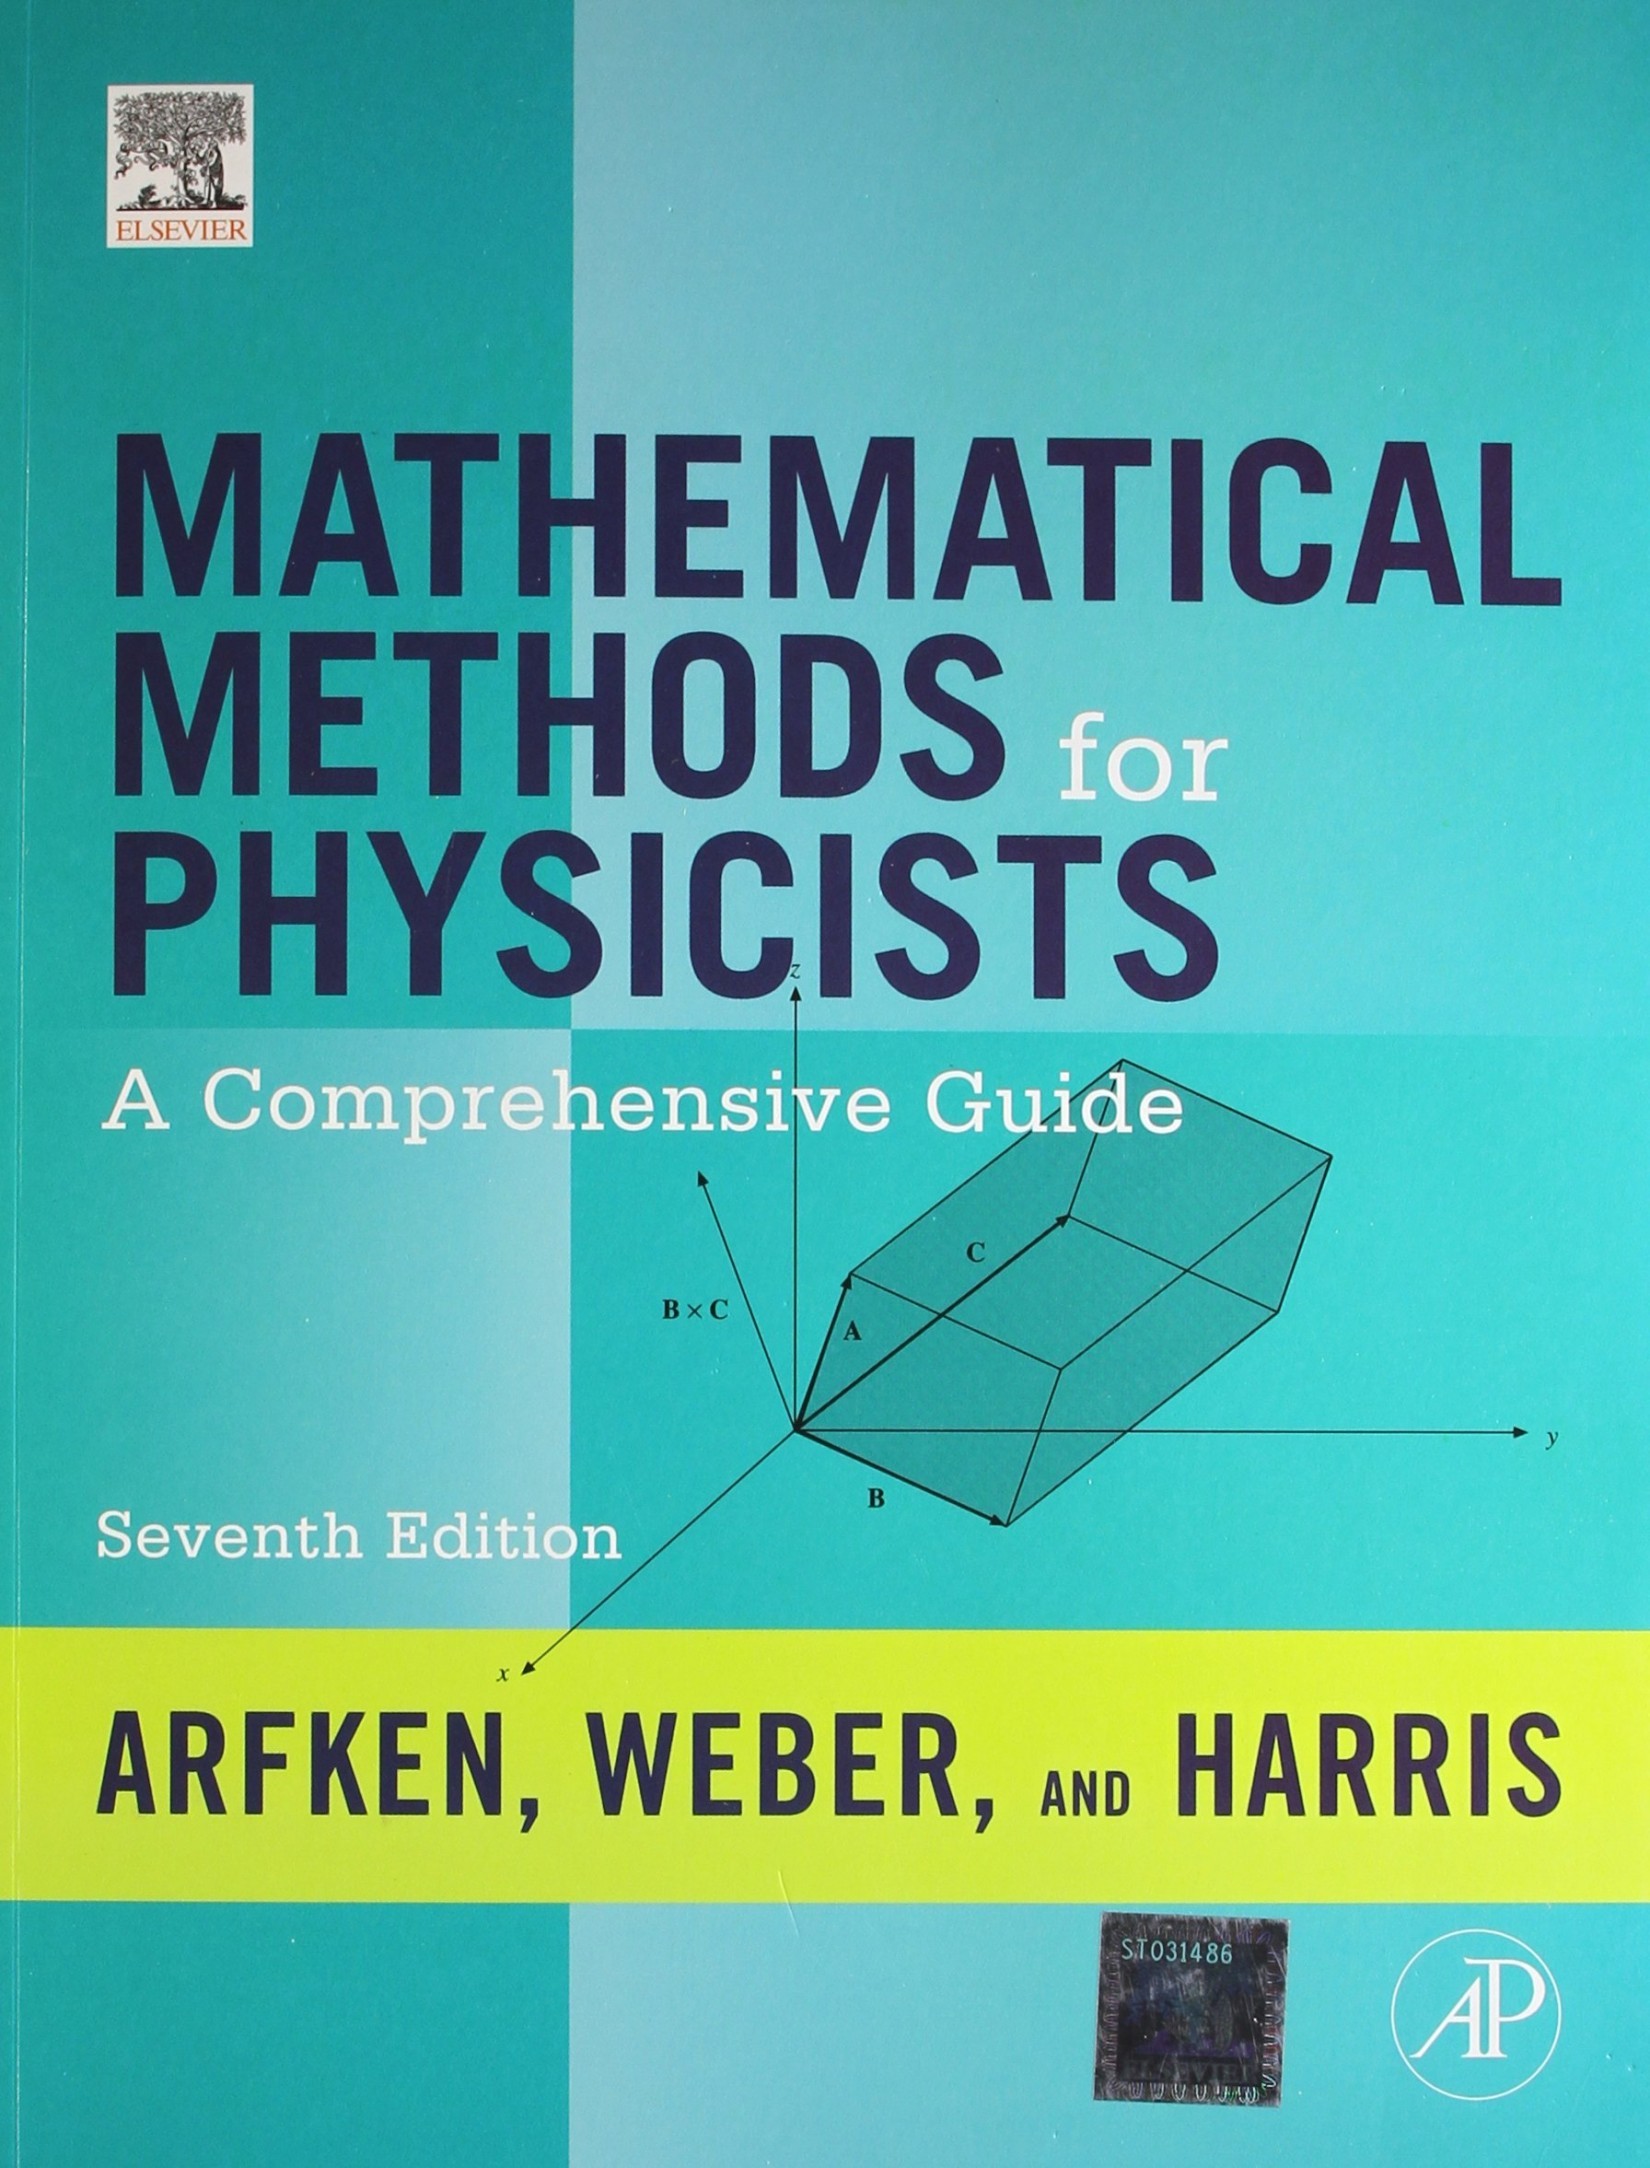 Mathematical Methods for Physicists: A Comprehensive Guide